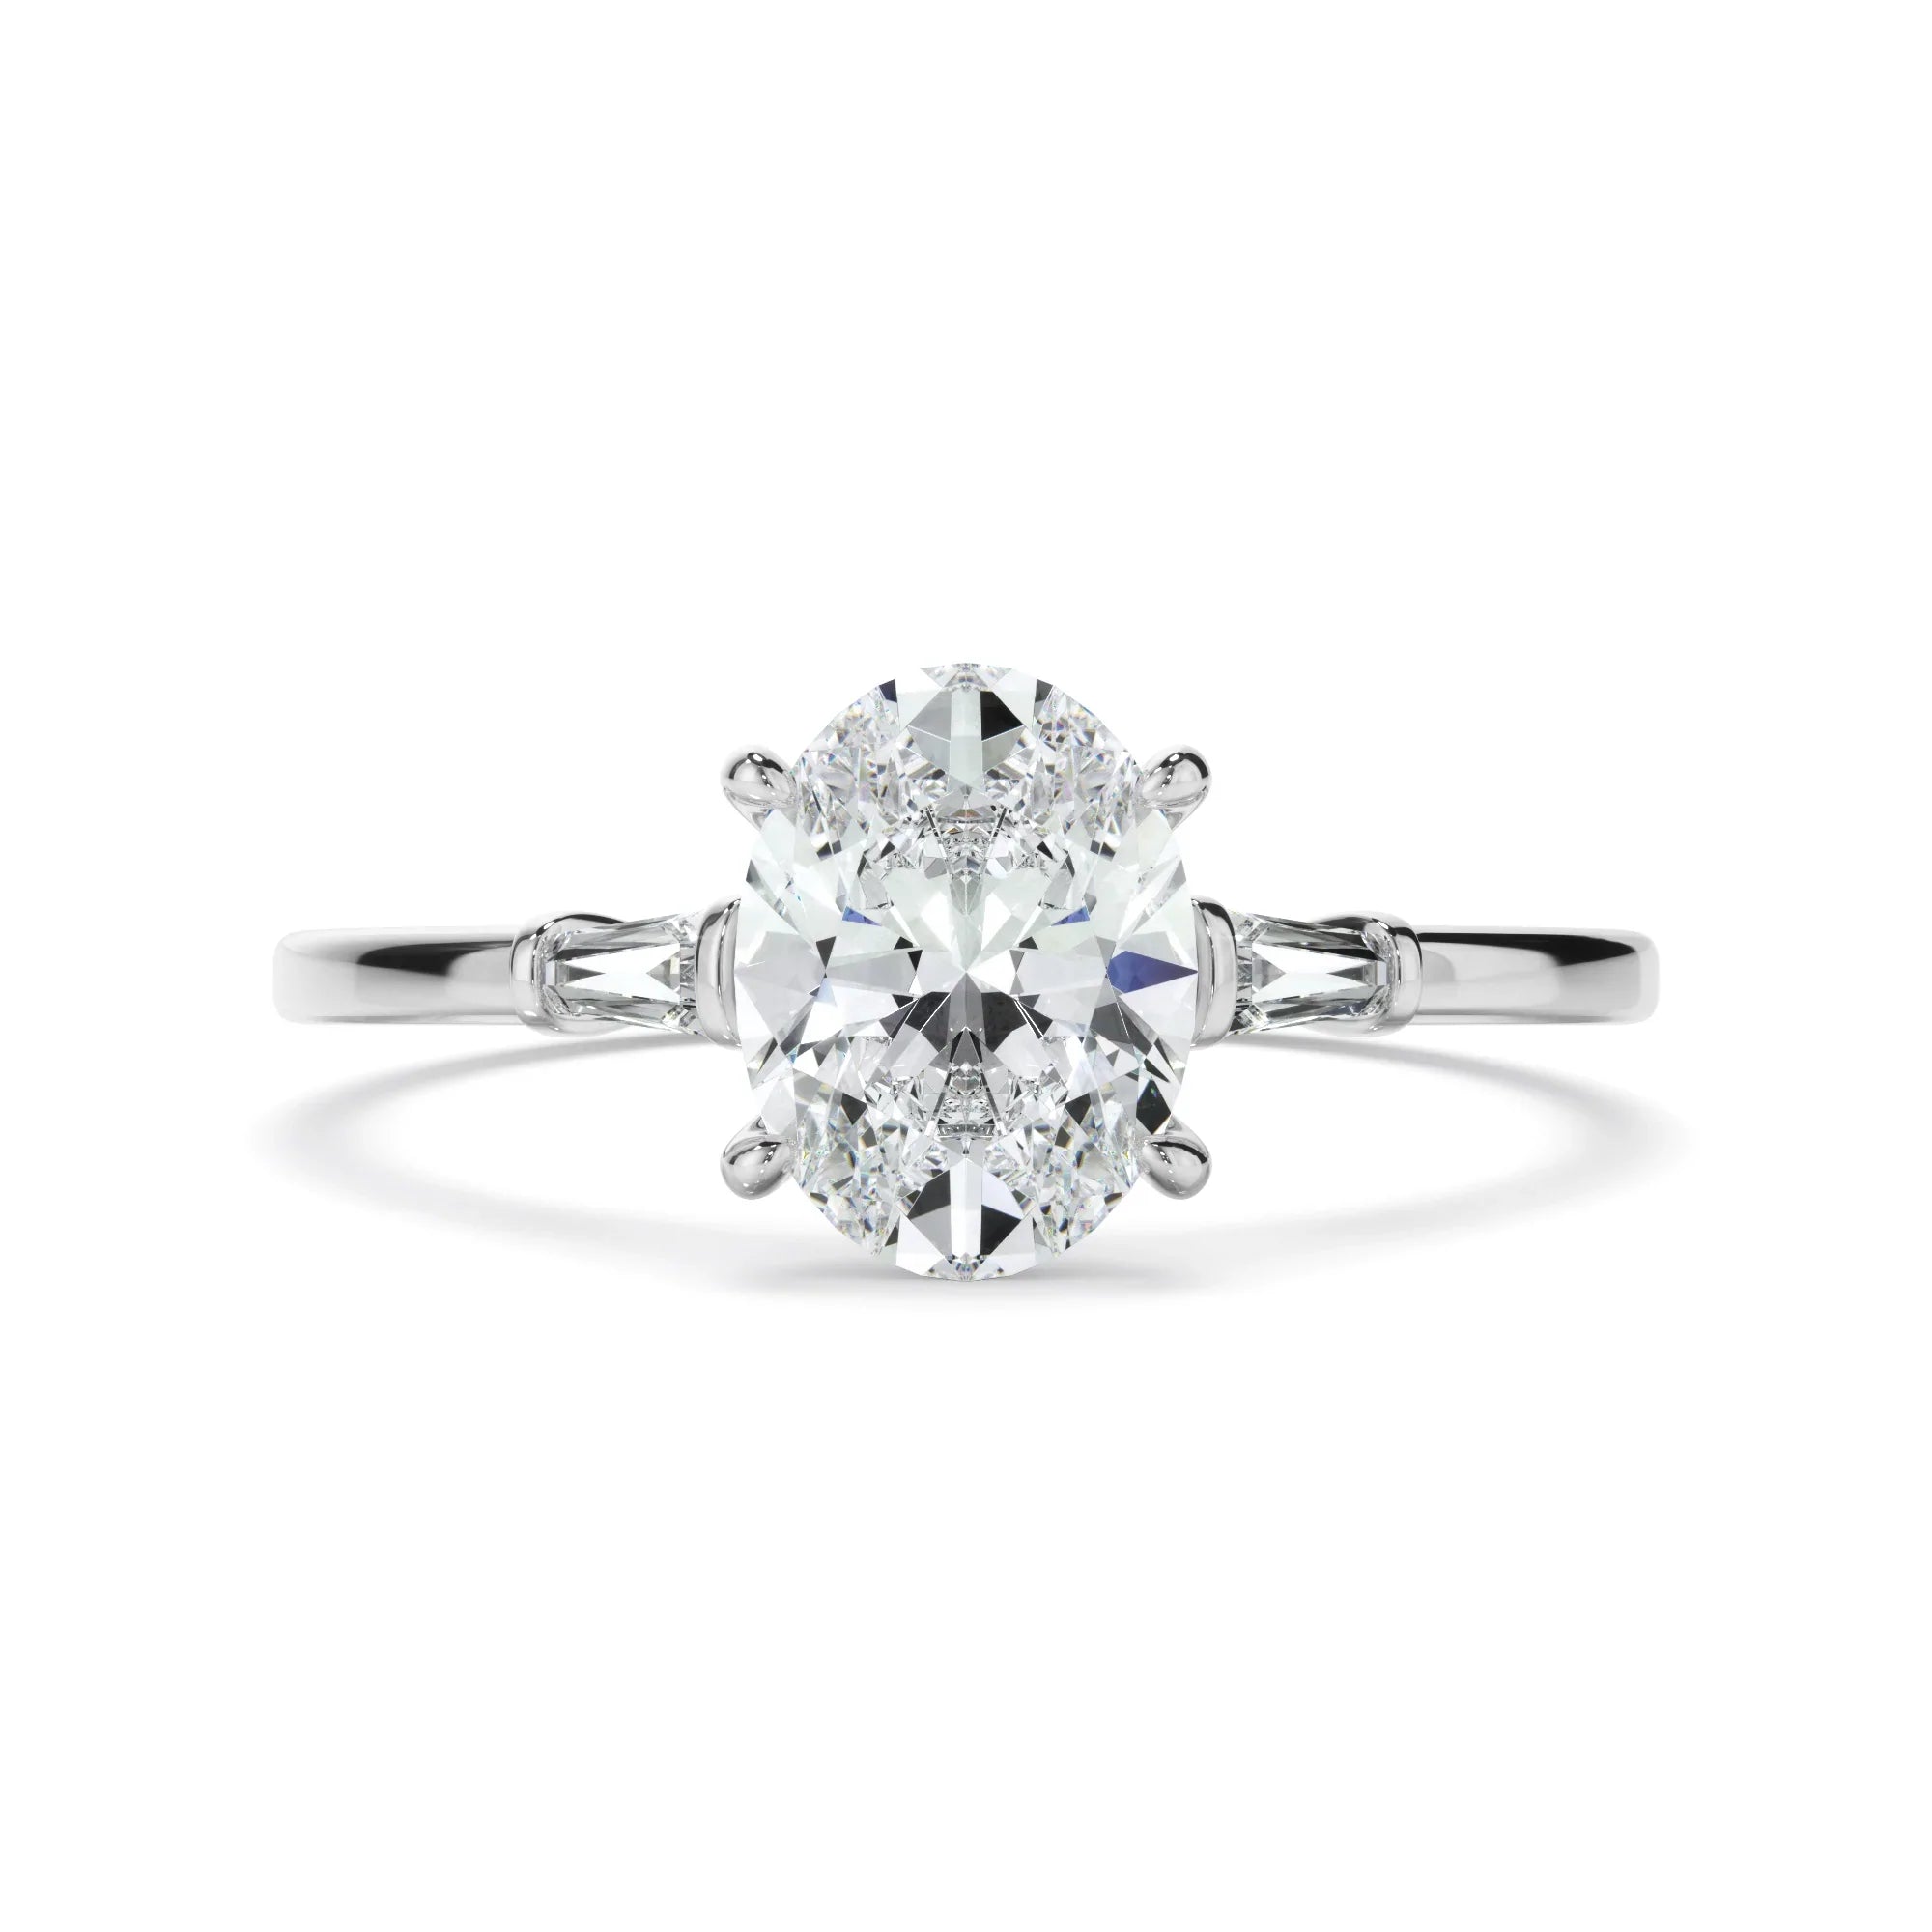 Oval Cut Diamond Engagement Ring With Baguette Sides